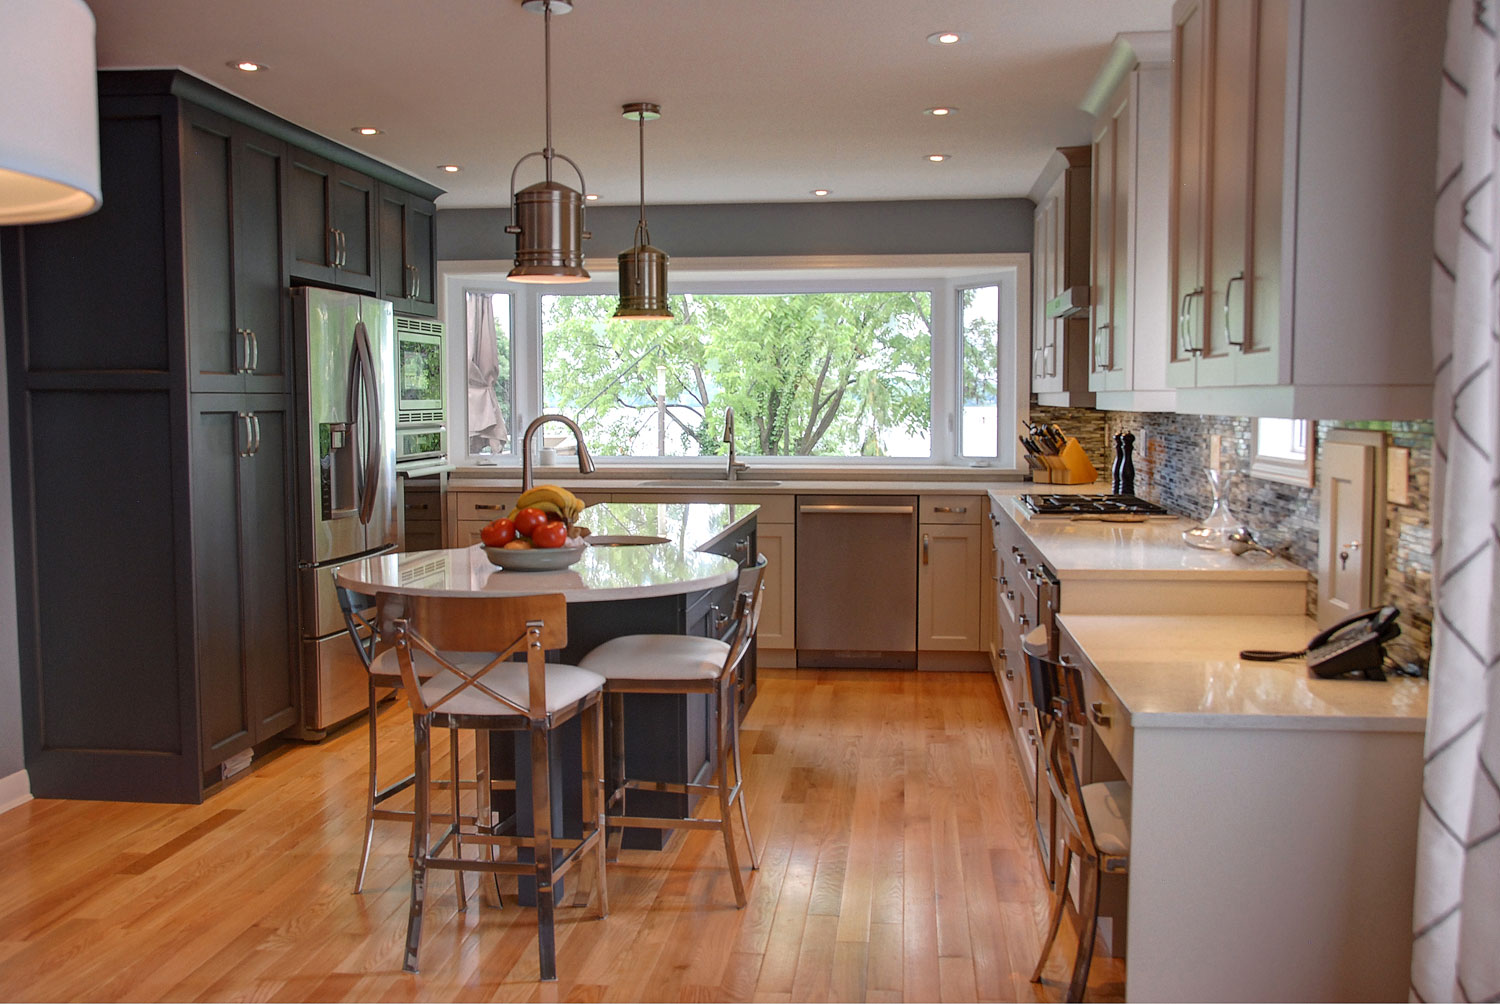 Lakefront cottage kitchen design and renovation with two tone cream and grey blue cabinets, a large island, stainless steel appliances, and hardwood floors - Total Living Concepts in Barrie Ontario